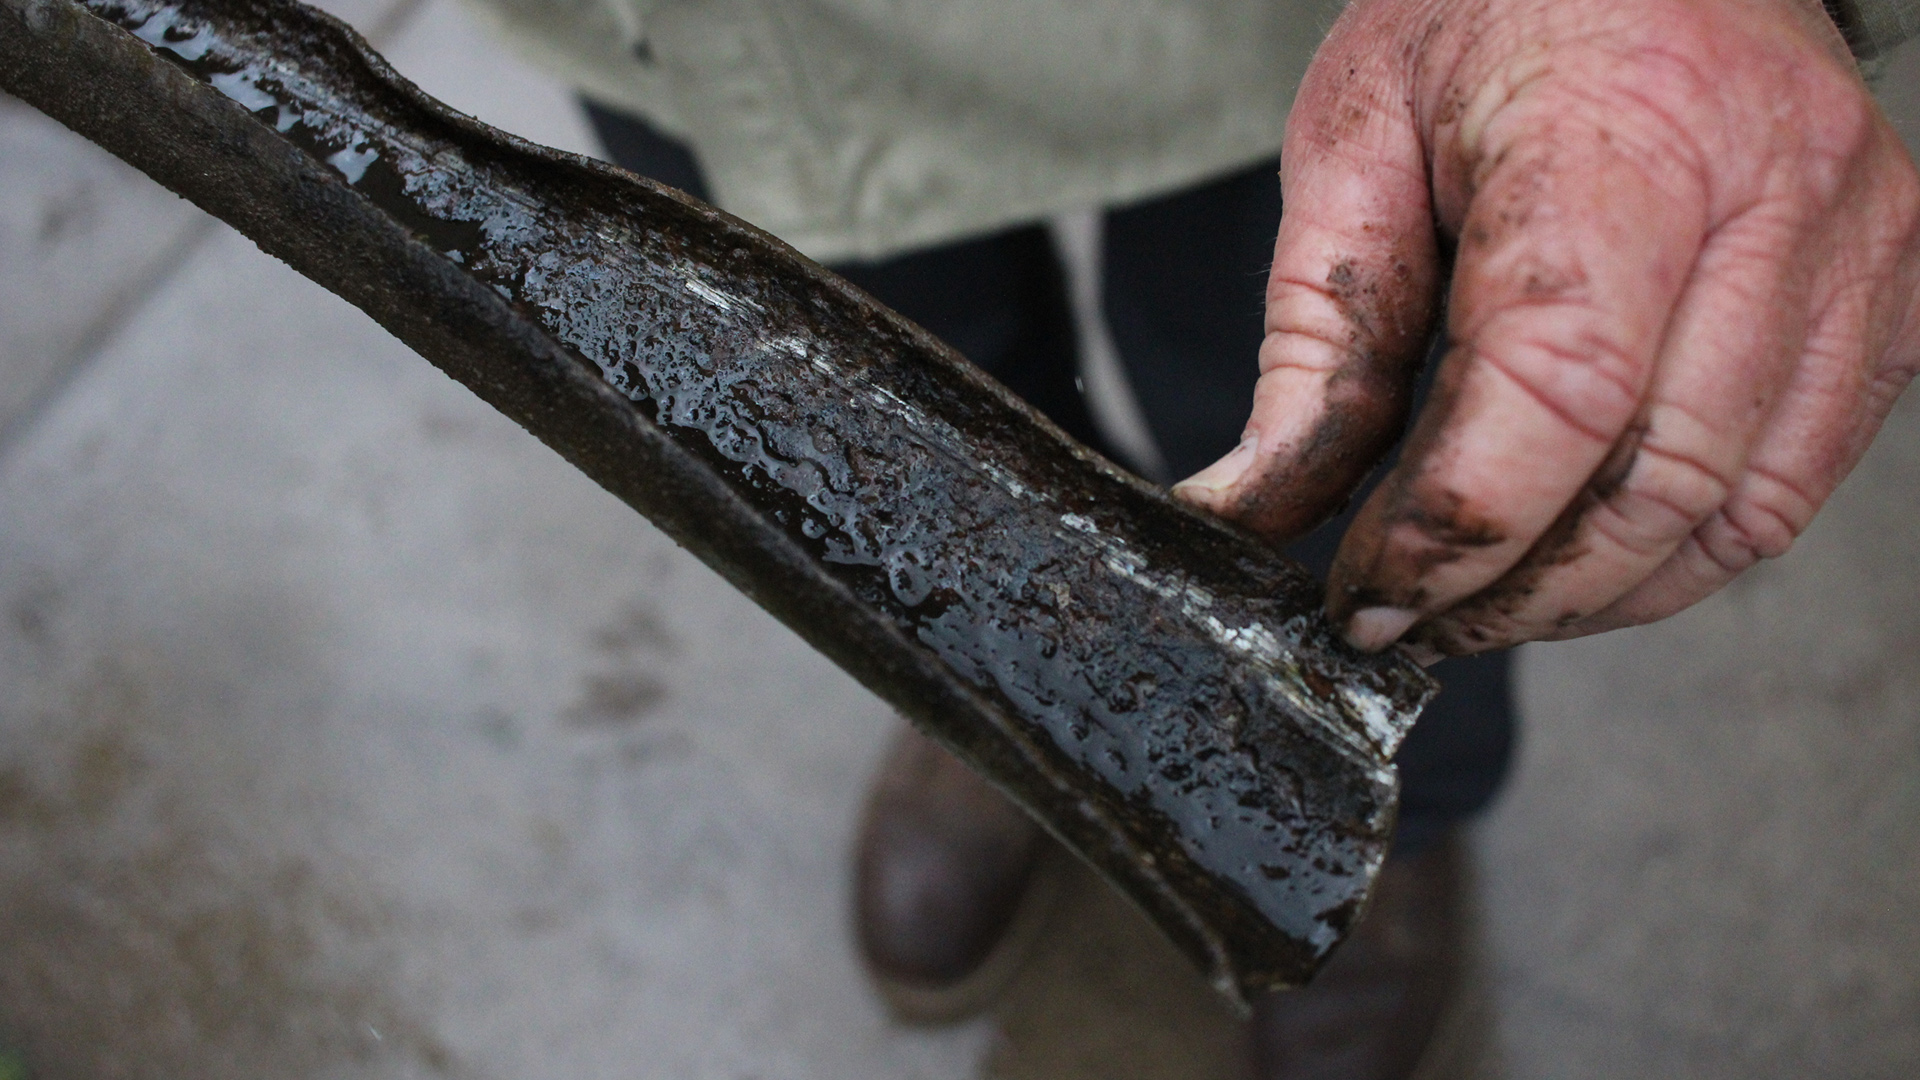 A worker shows a mud covered lead pipe removed from a property.